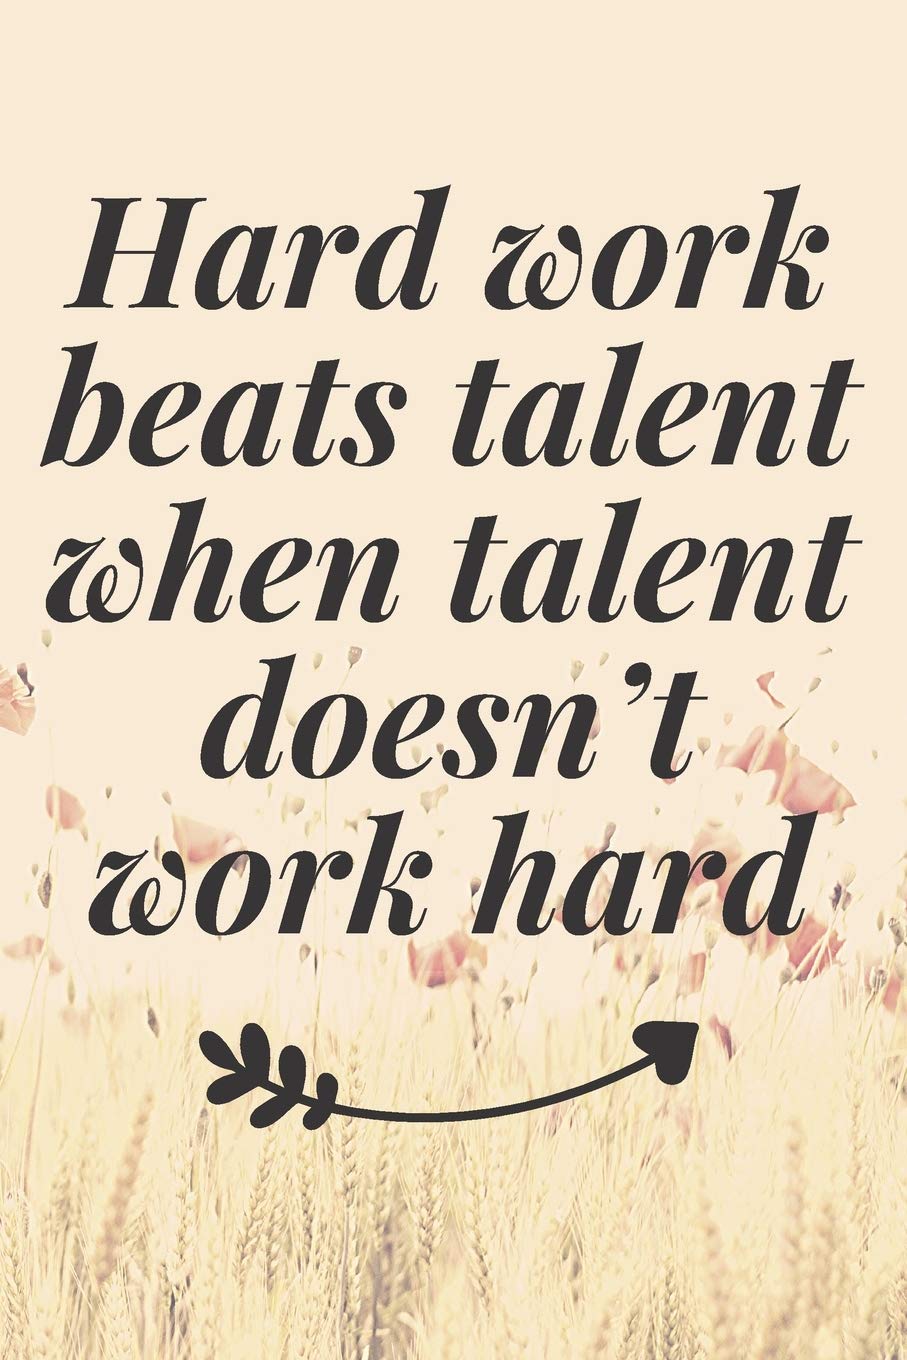 Buy Hard work beats talent when talent doesn't work hard: The Motivation Journal That Keeps Your Dreams /goals Alive and make it happen Book Online at Low Prices in India